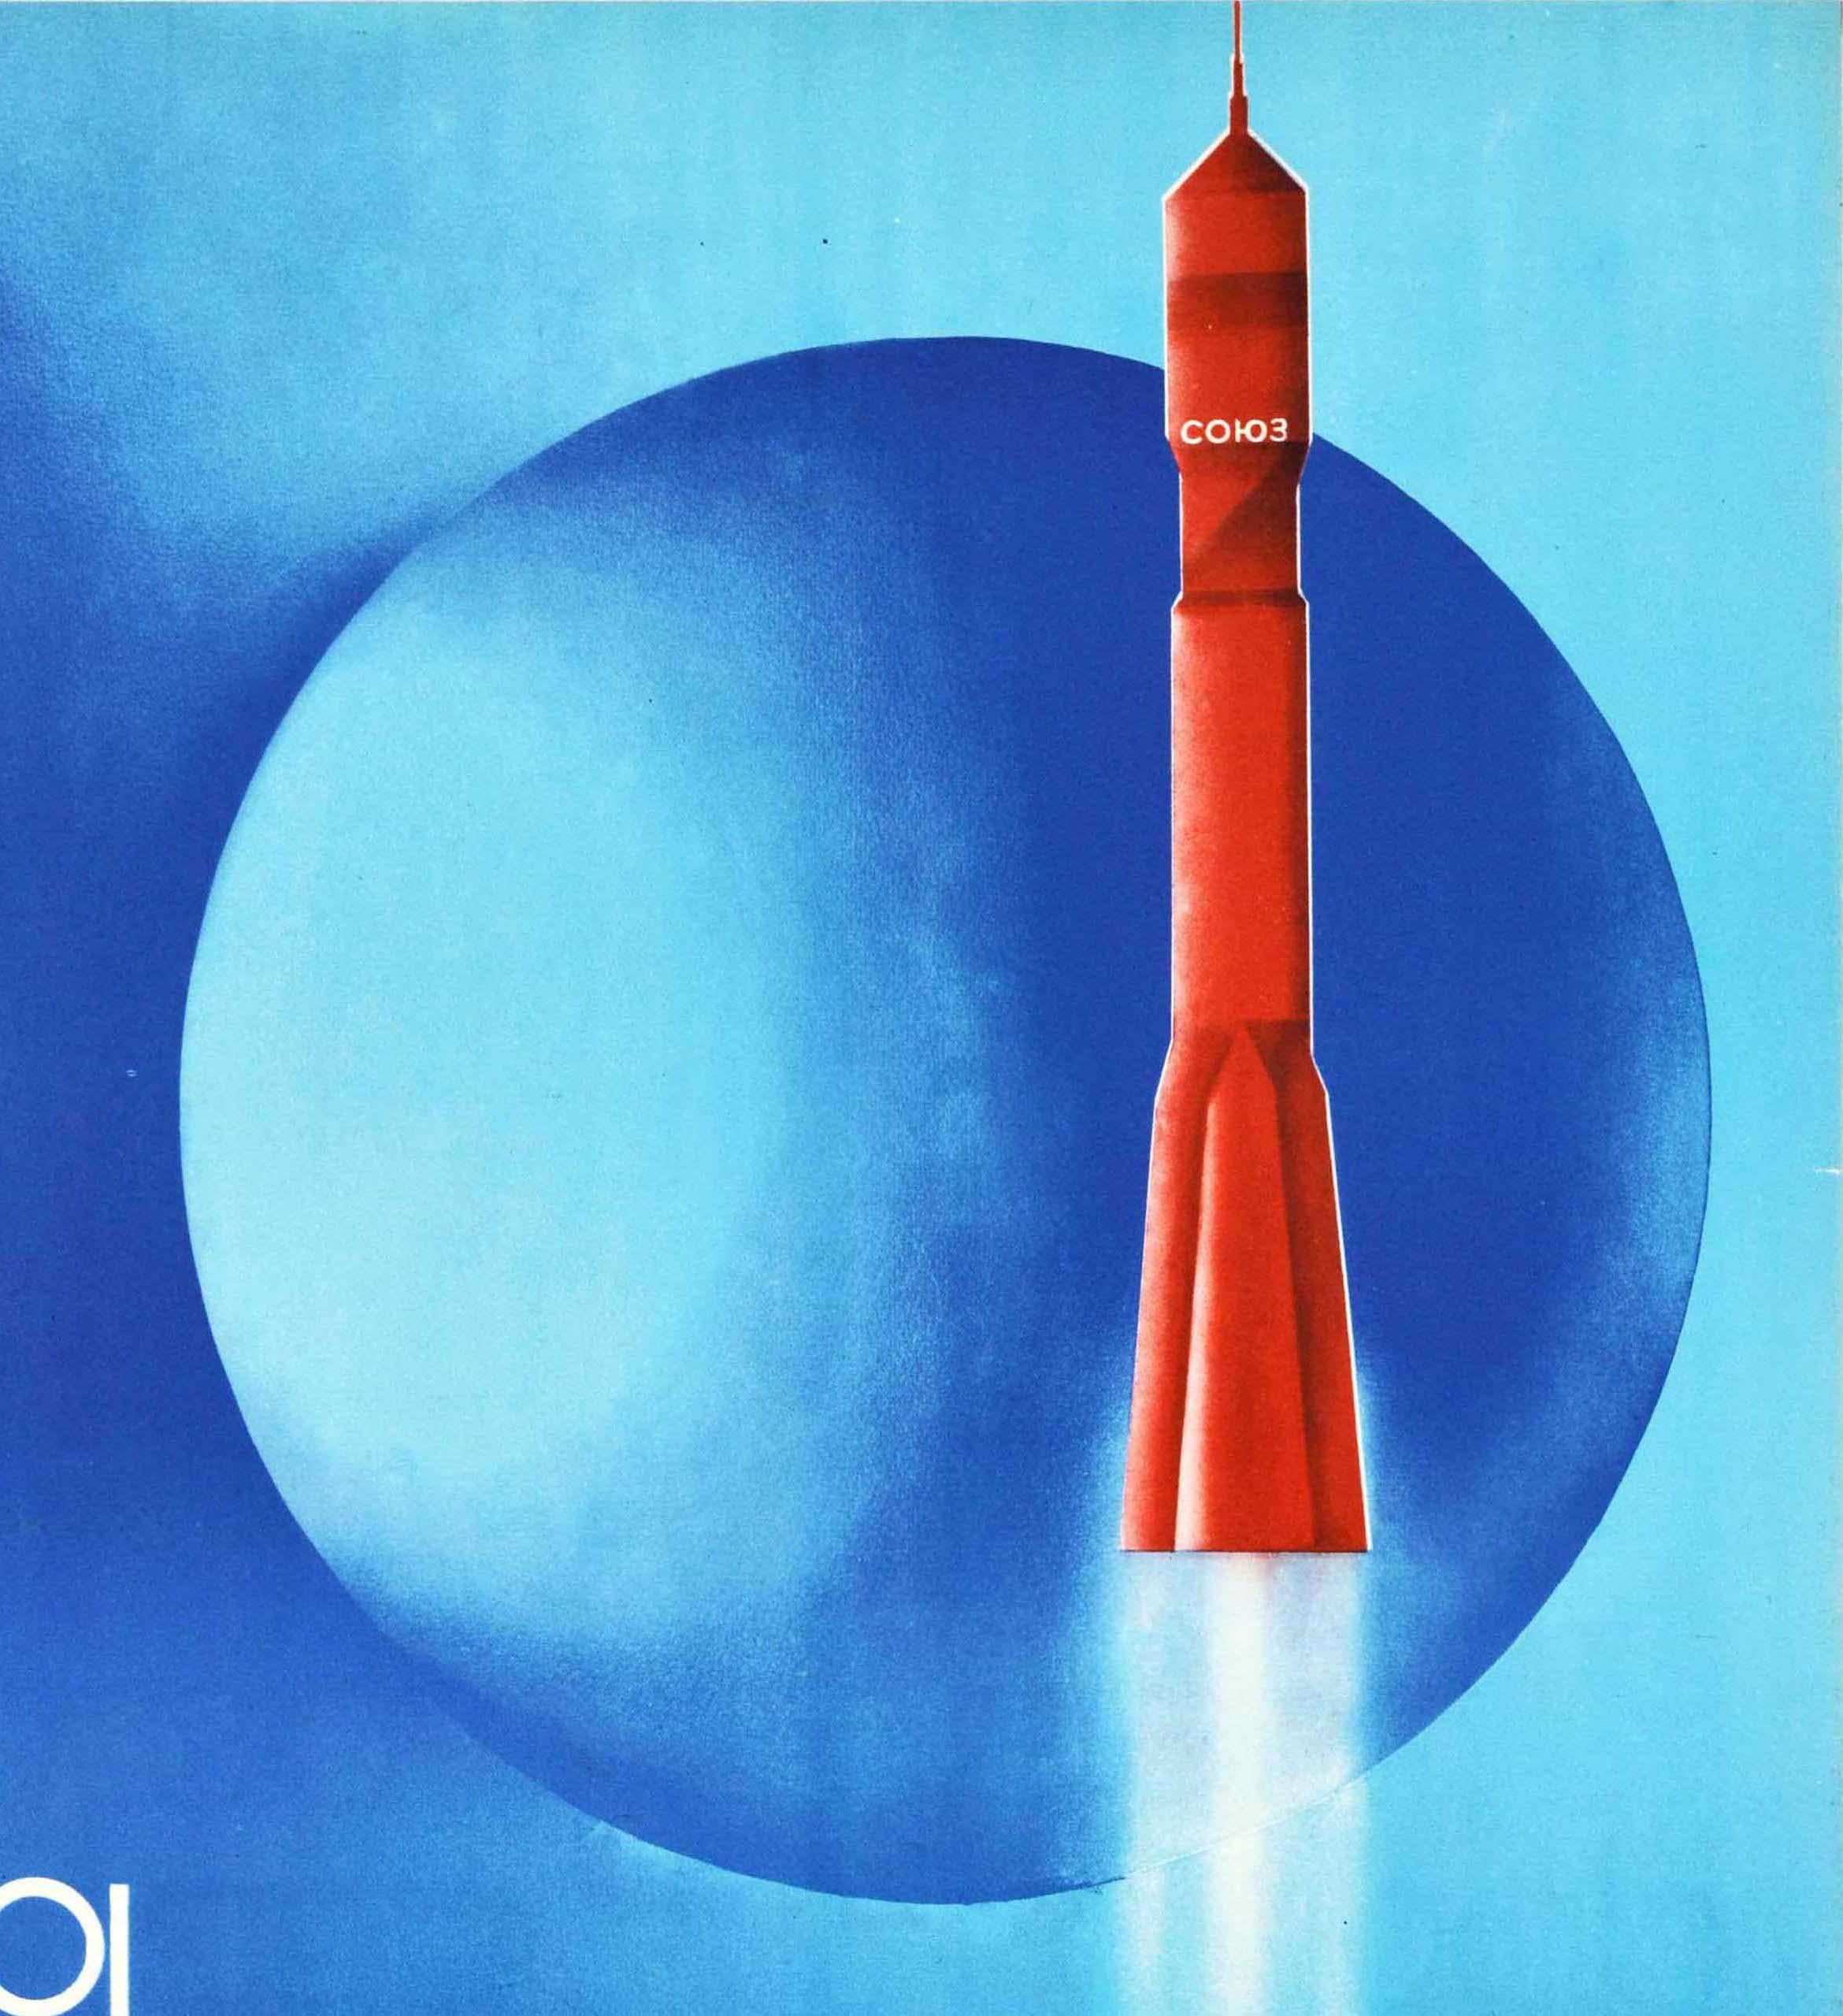 Original vintage Soviet space poster - ?? ???? ??????? ???? ???????? / Feats of centuries achieved in years - featuring a great design showing a rocket in red marked ???? / Soyuz in white ascending at speed against a blue background with a shape of